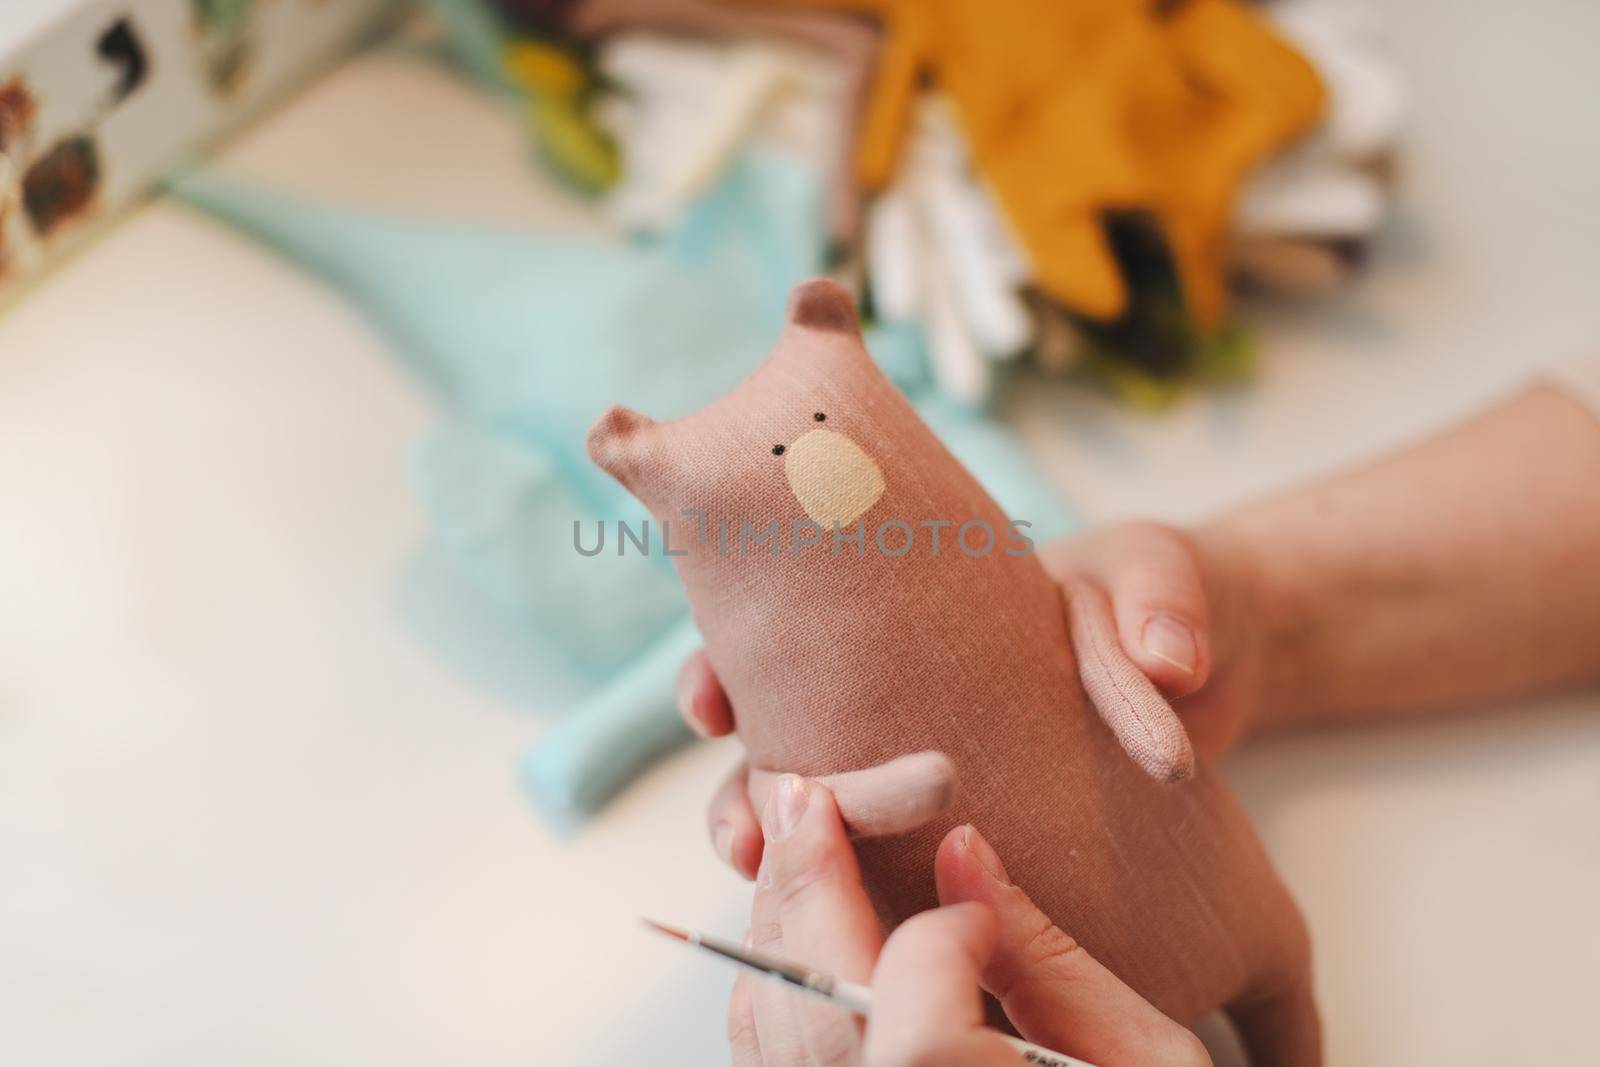 process of making handmade toys. Handicraft, hobby, unique job concept by paralisart